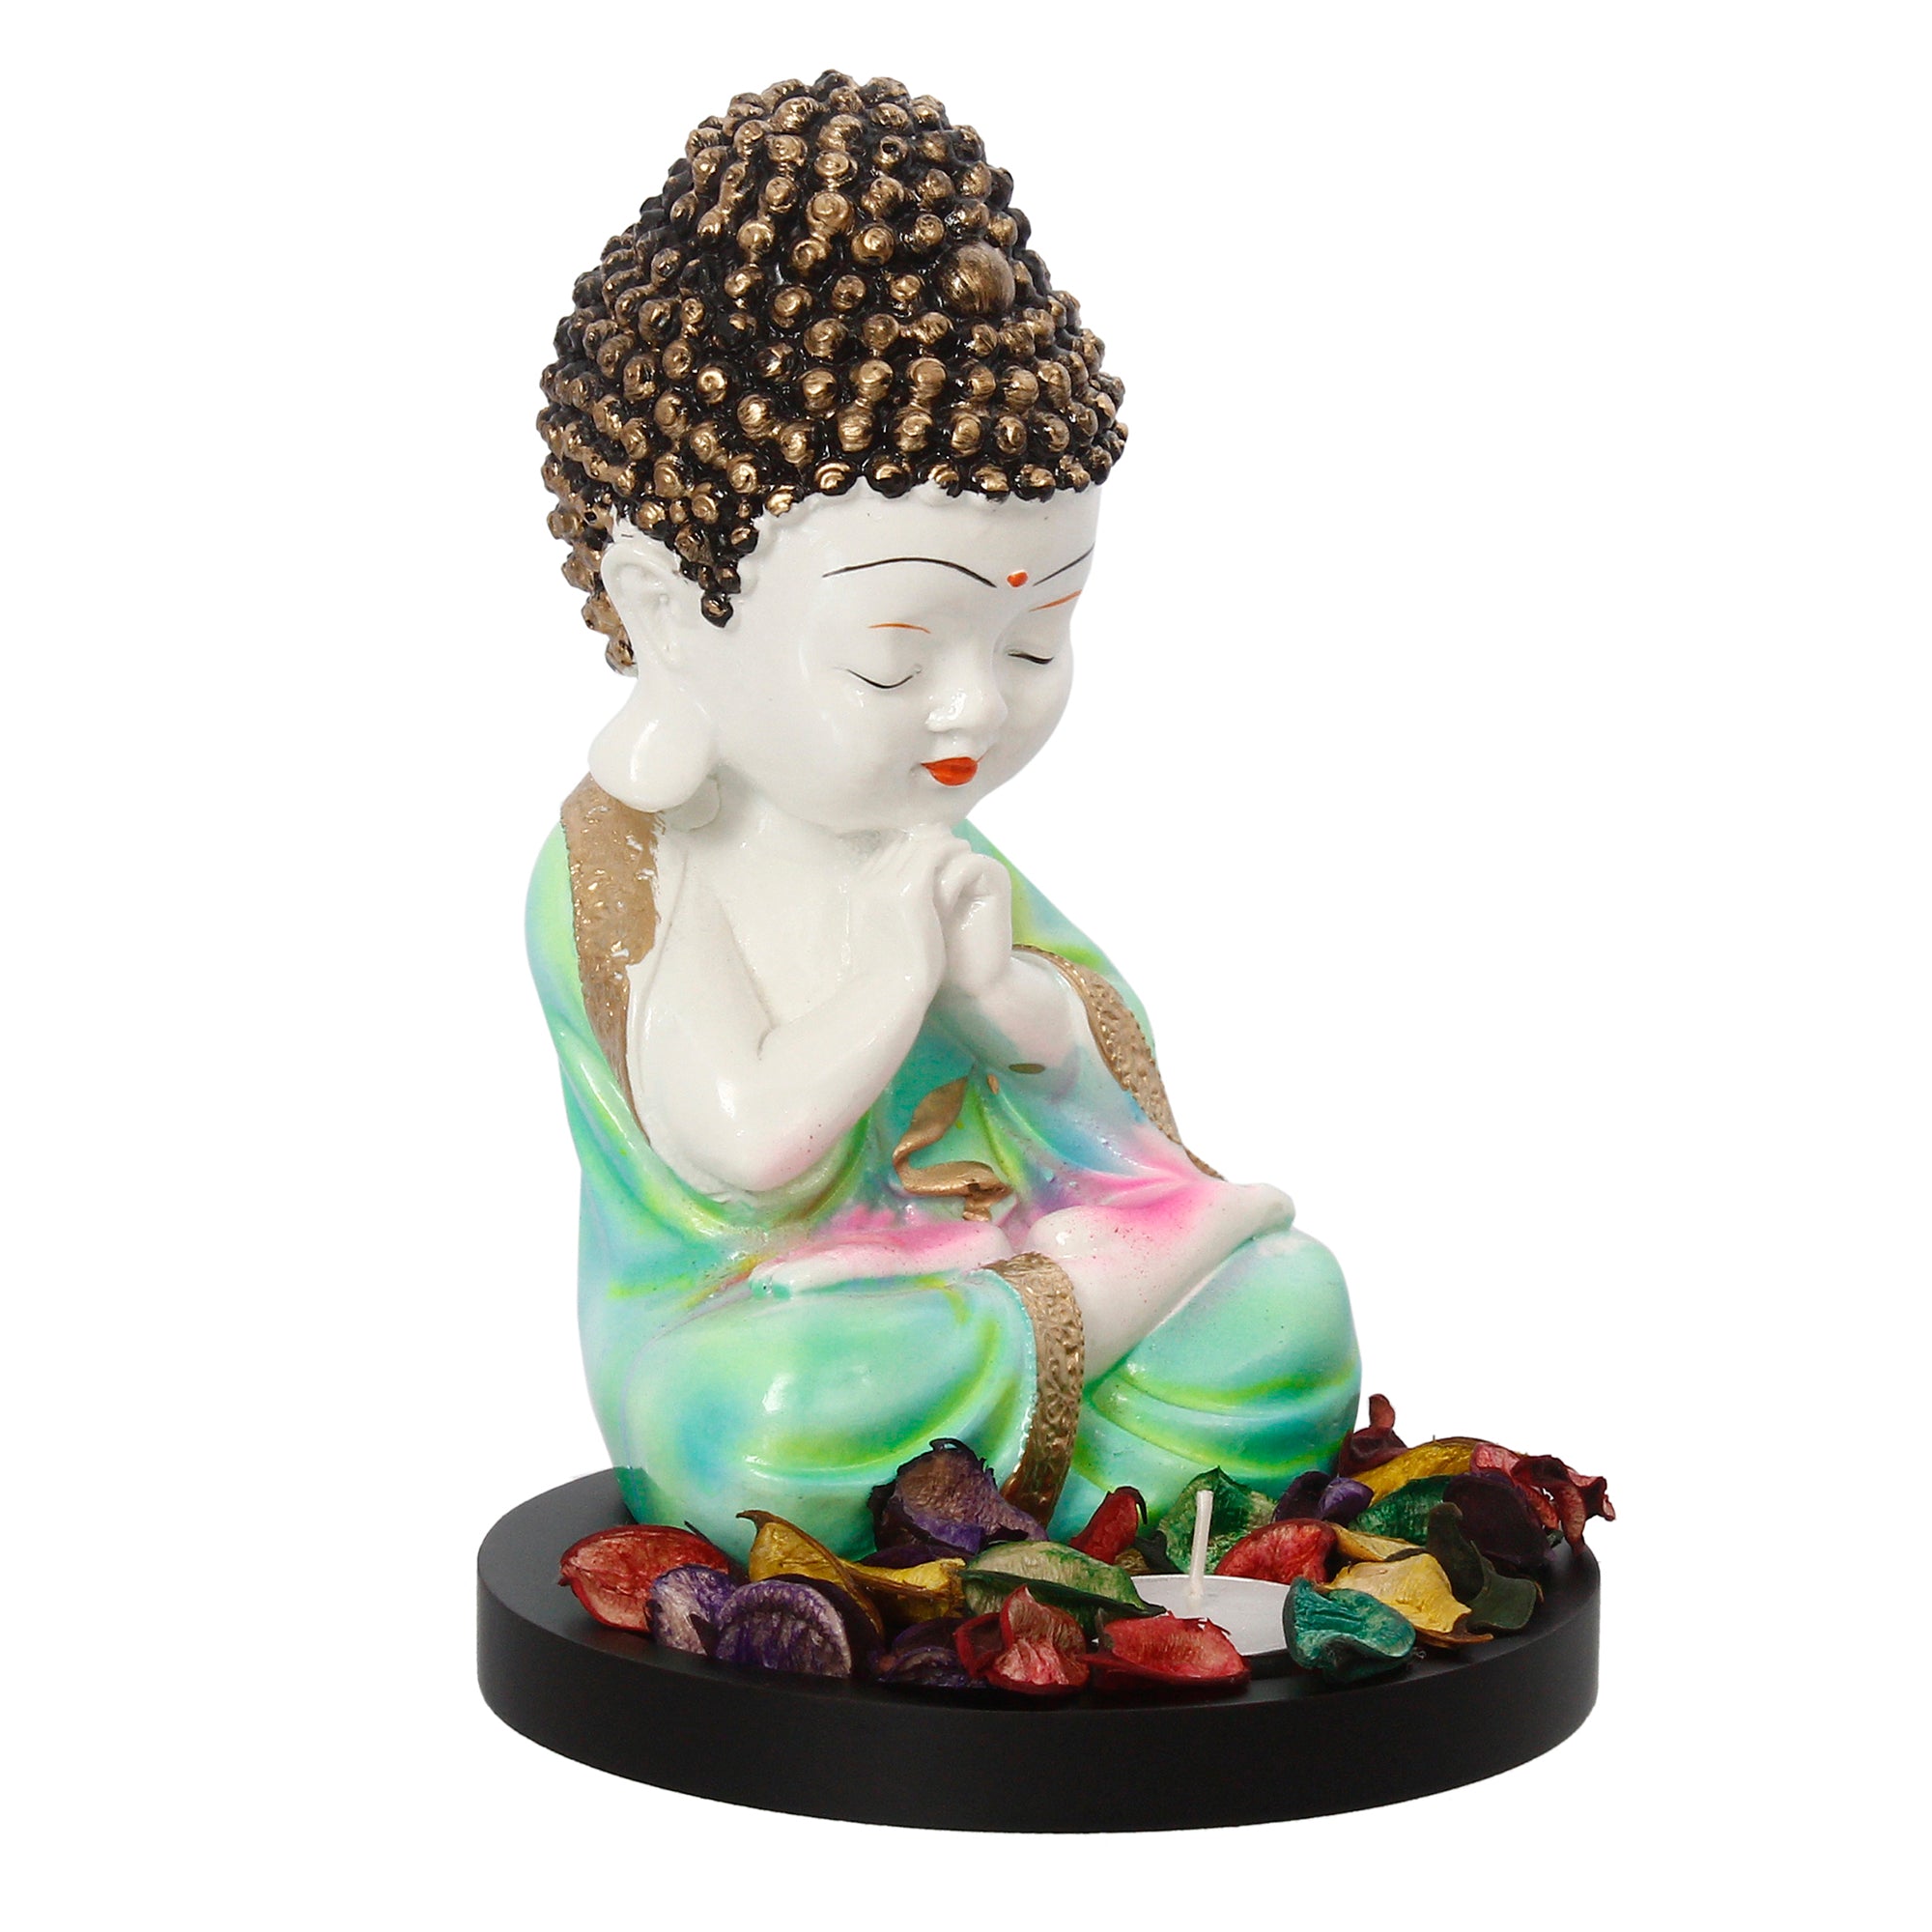 Polyresin Green and White Praying Monk Buddha Statue with Wooden Base, Fragranced Petals and Tealight 4